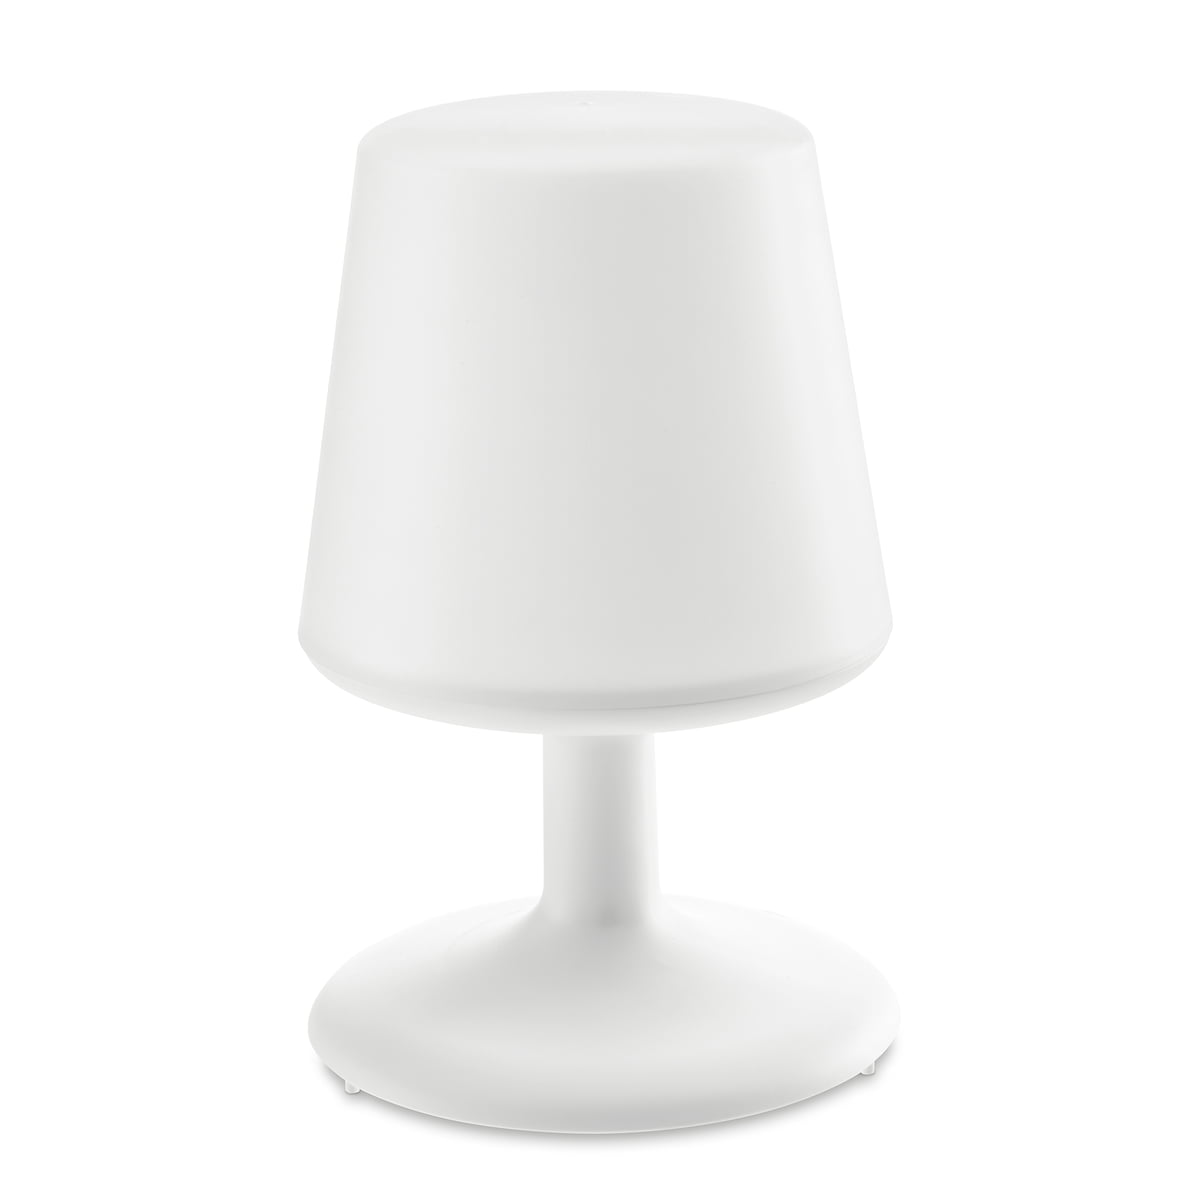 Light To Go Battery Powered Table Lamp, Cordless Battery Powered Operated Table Lamps